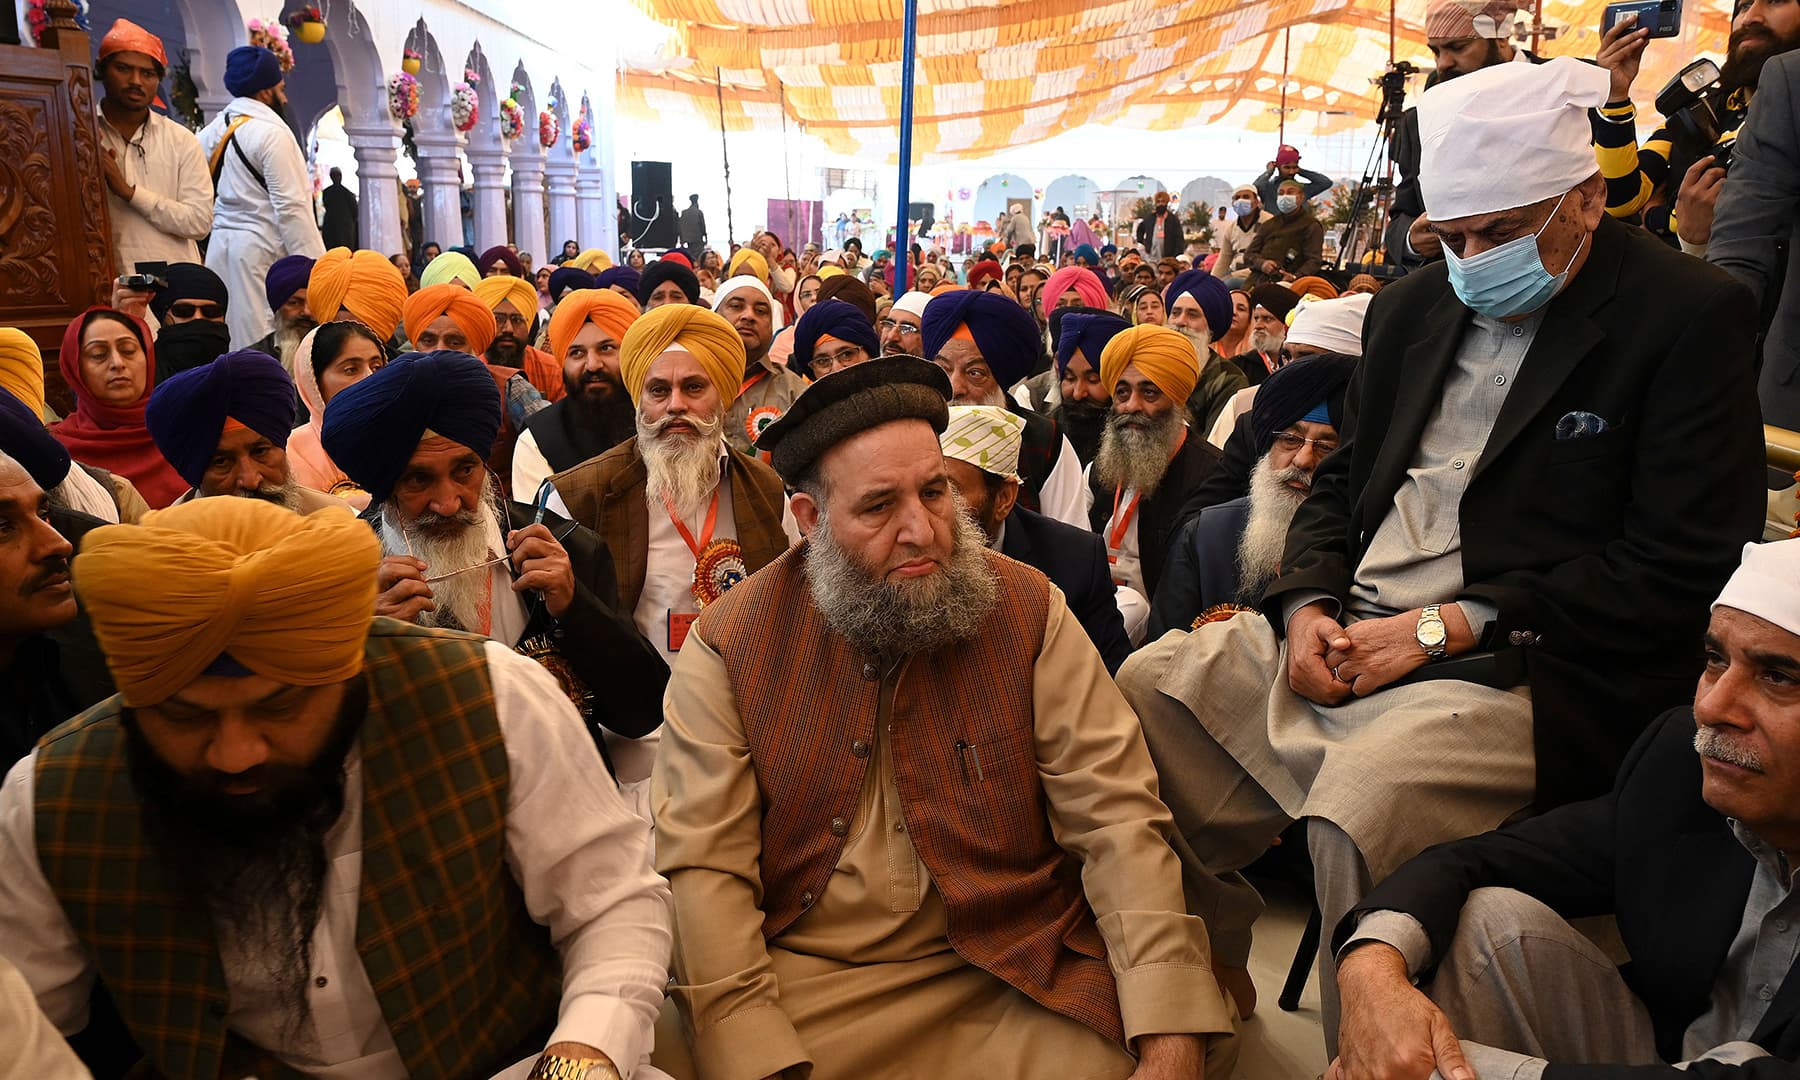 Minister for Religious Affairs Noorul Haq Qadri (C) attends a ceremony during a Sikh religious procession in Nankana Sahib on Friday. — AFP